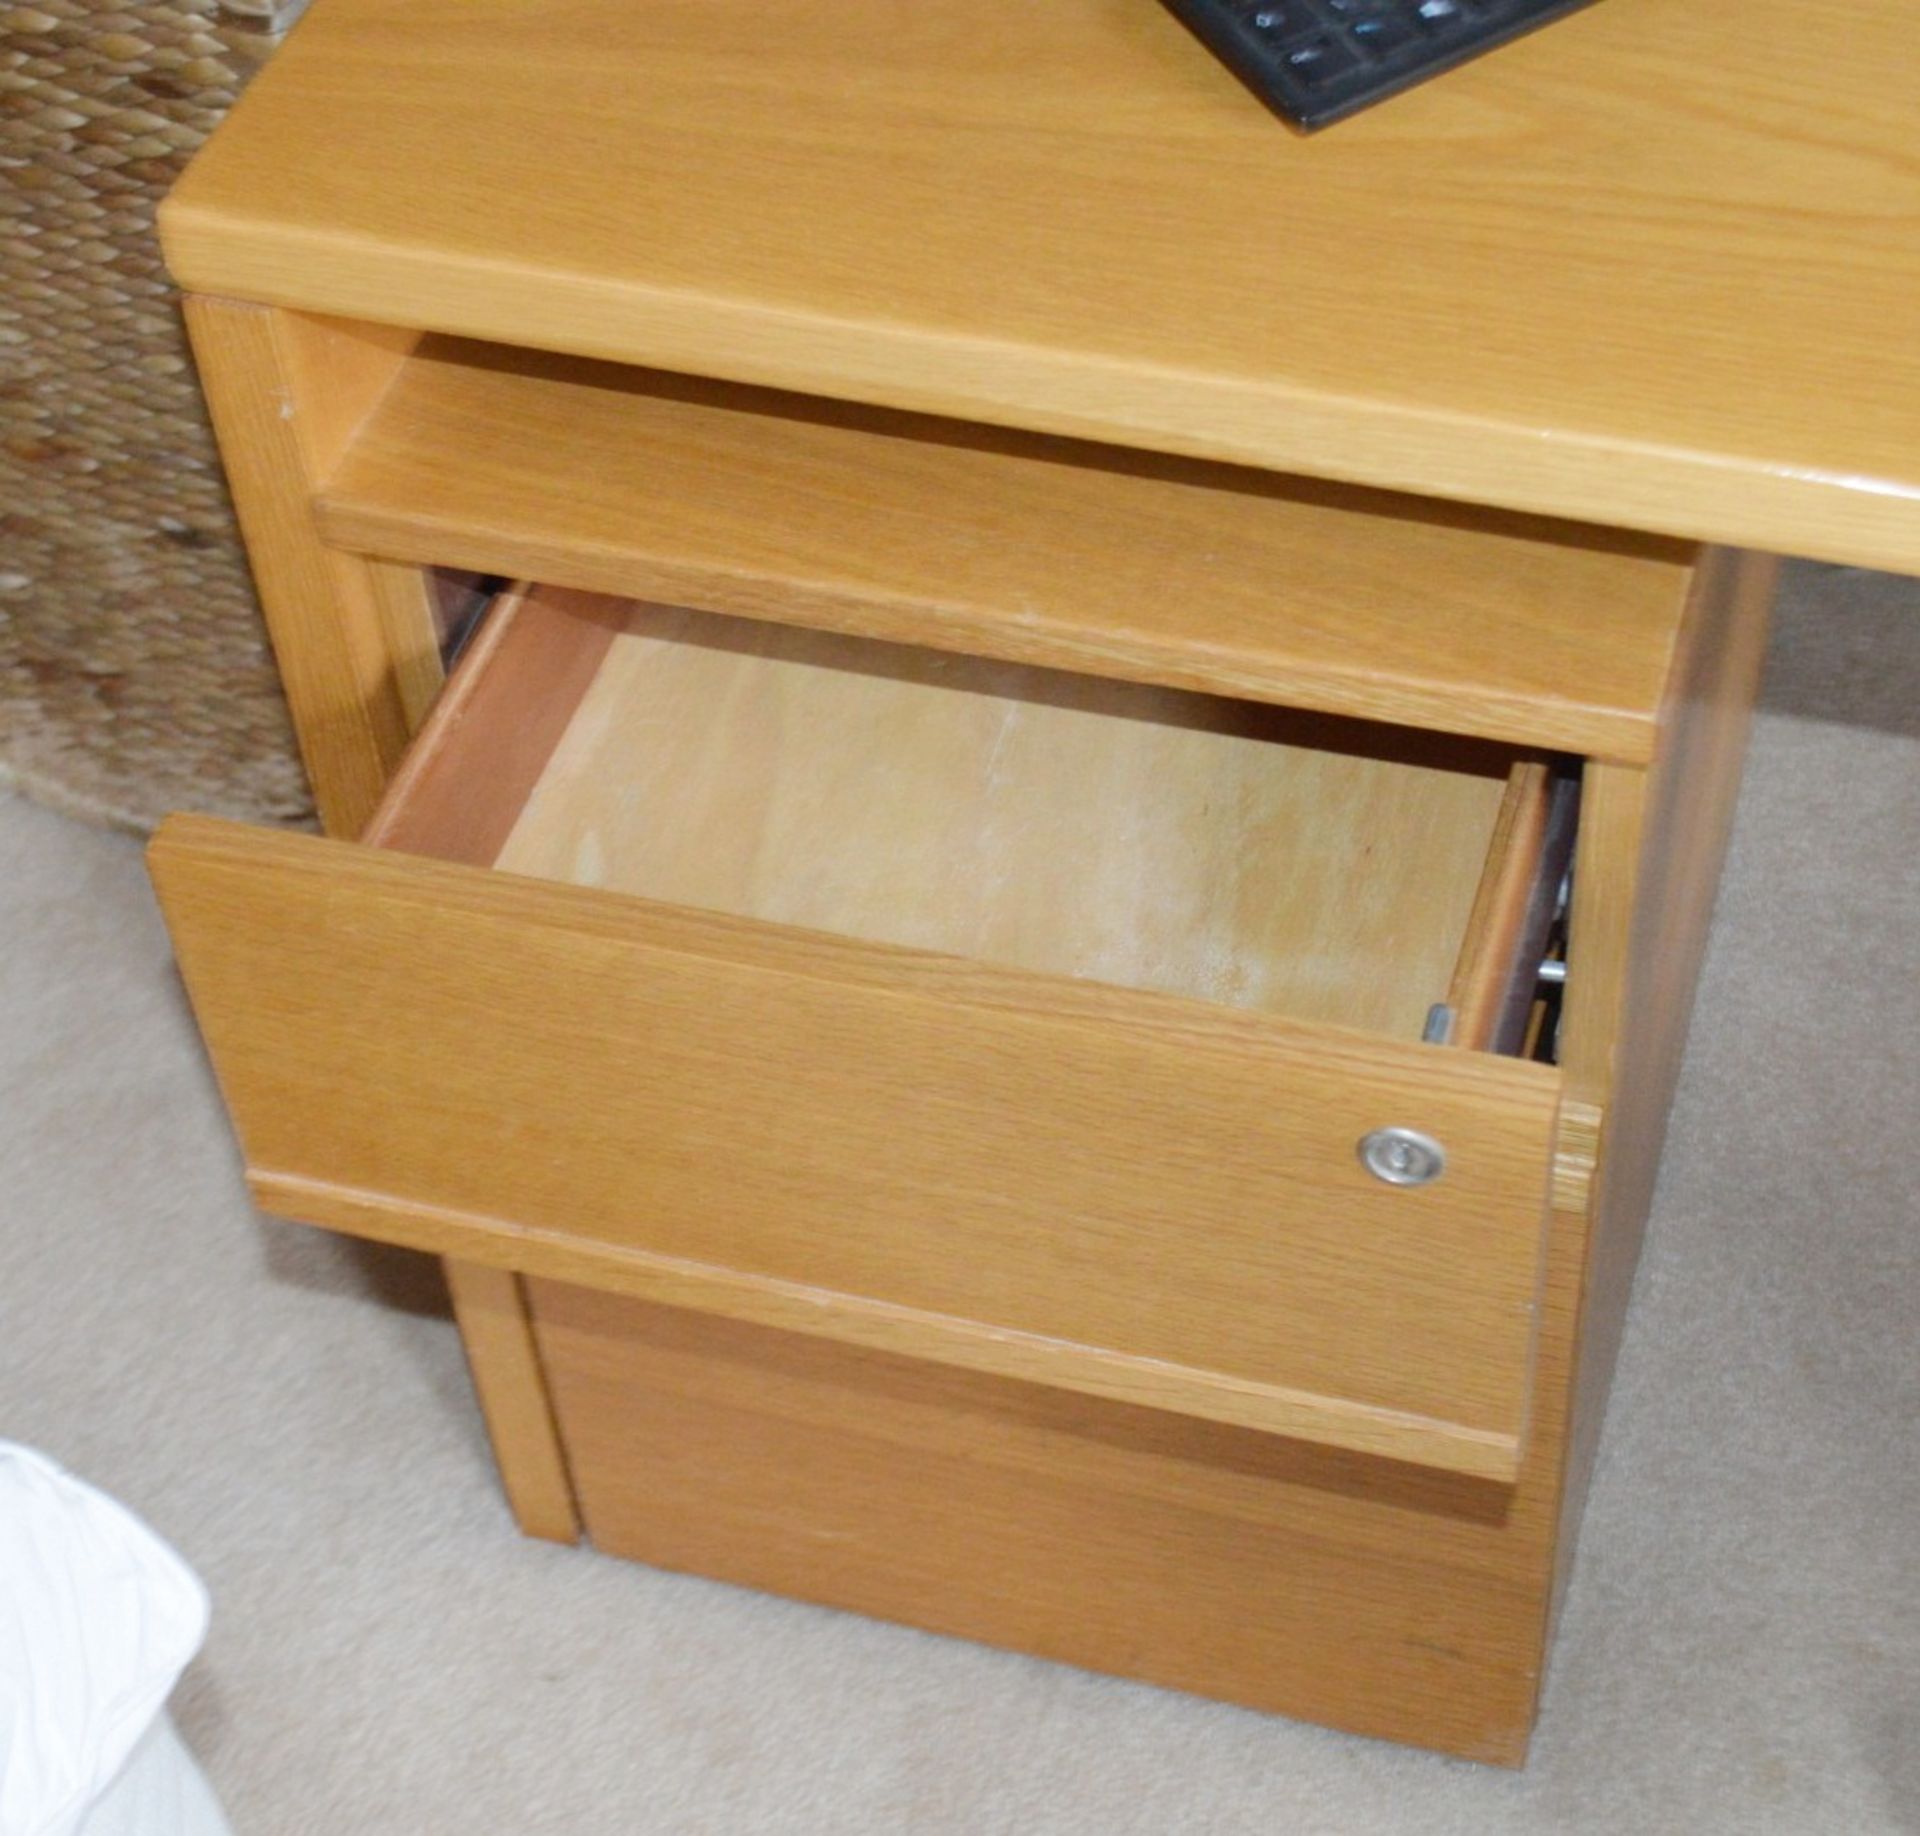 3-Piece Bedroom Set - Includes Desk, Chair And Wicker Basket - NO VAT ON THE HAMMER - CL630 - - Image 2 of 5